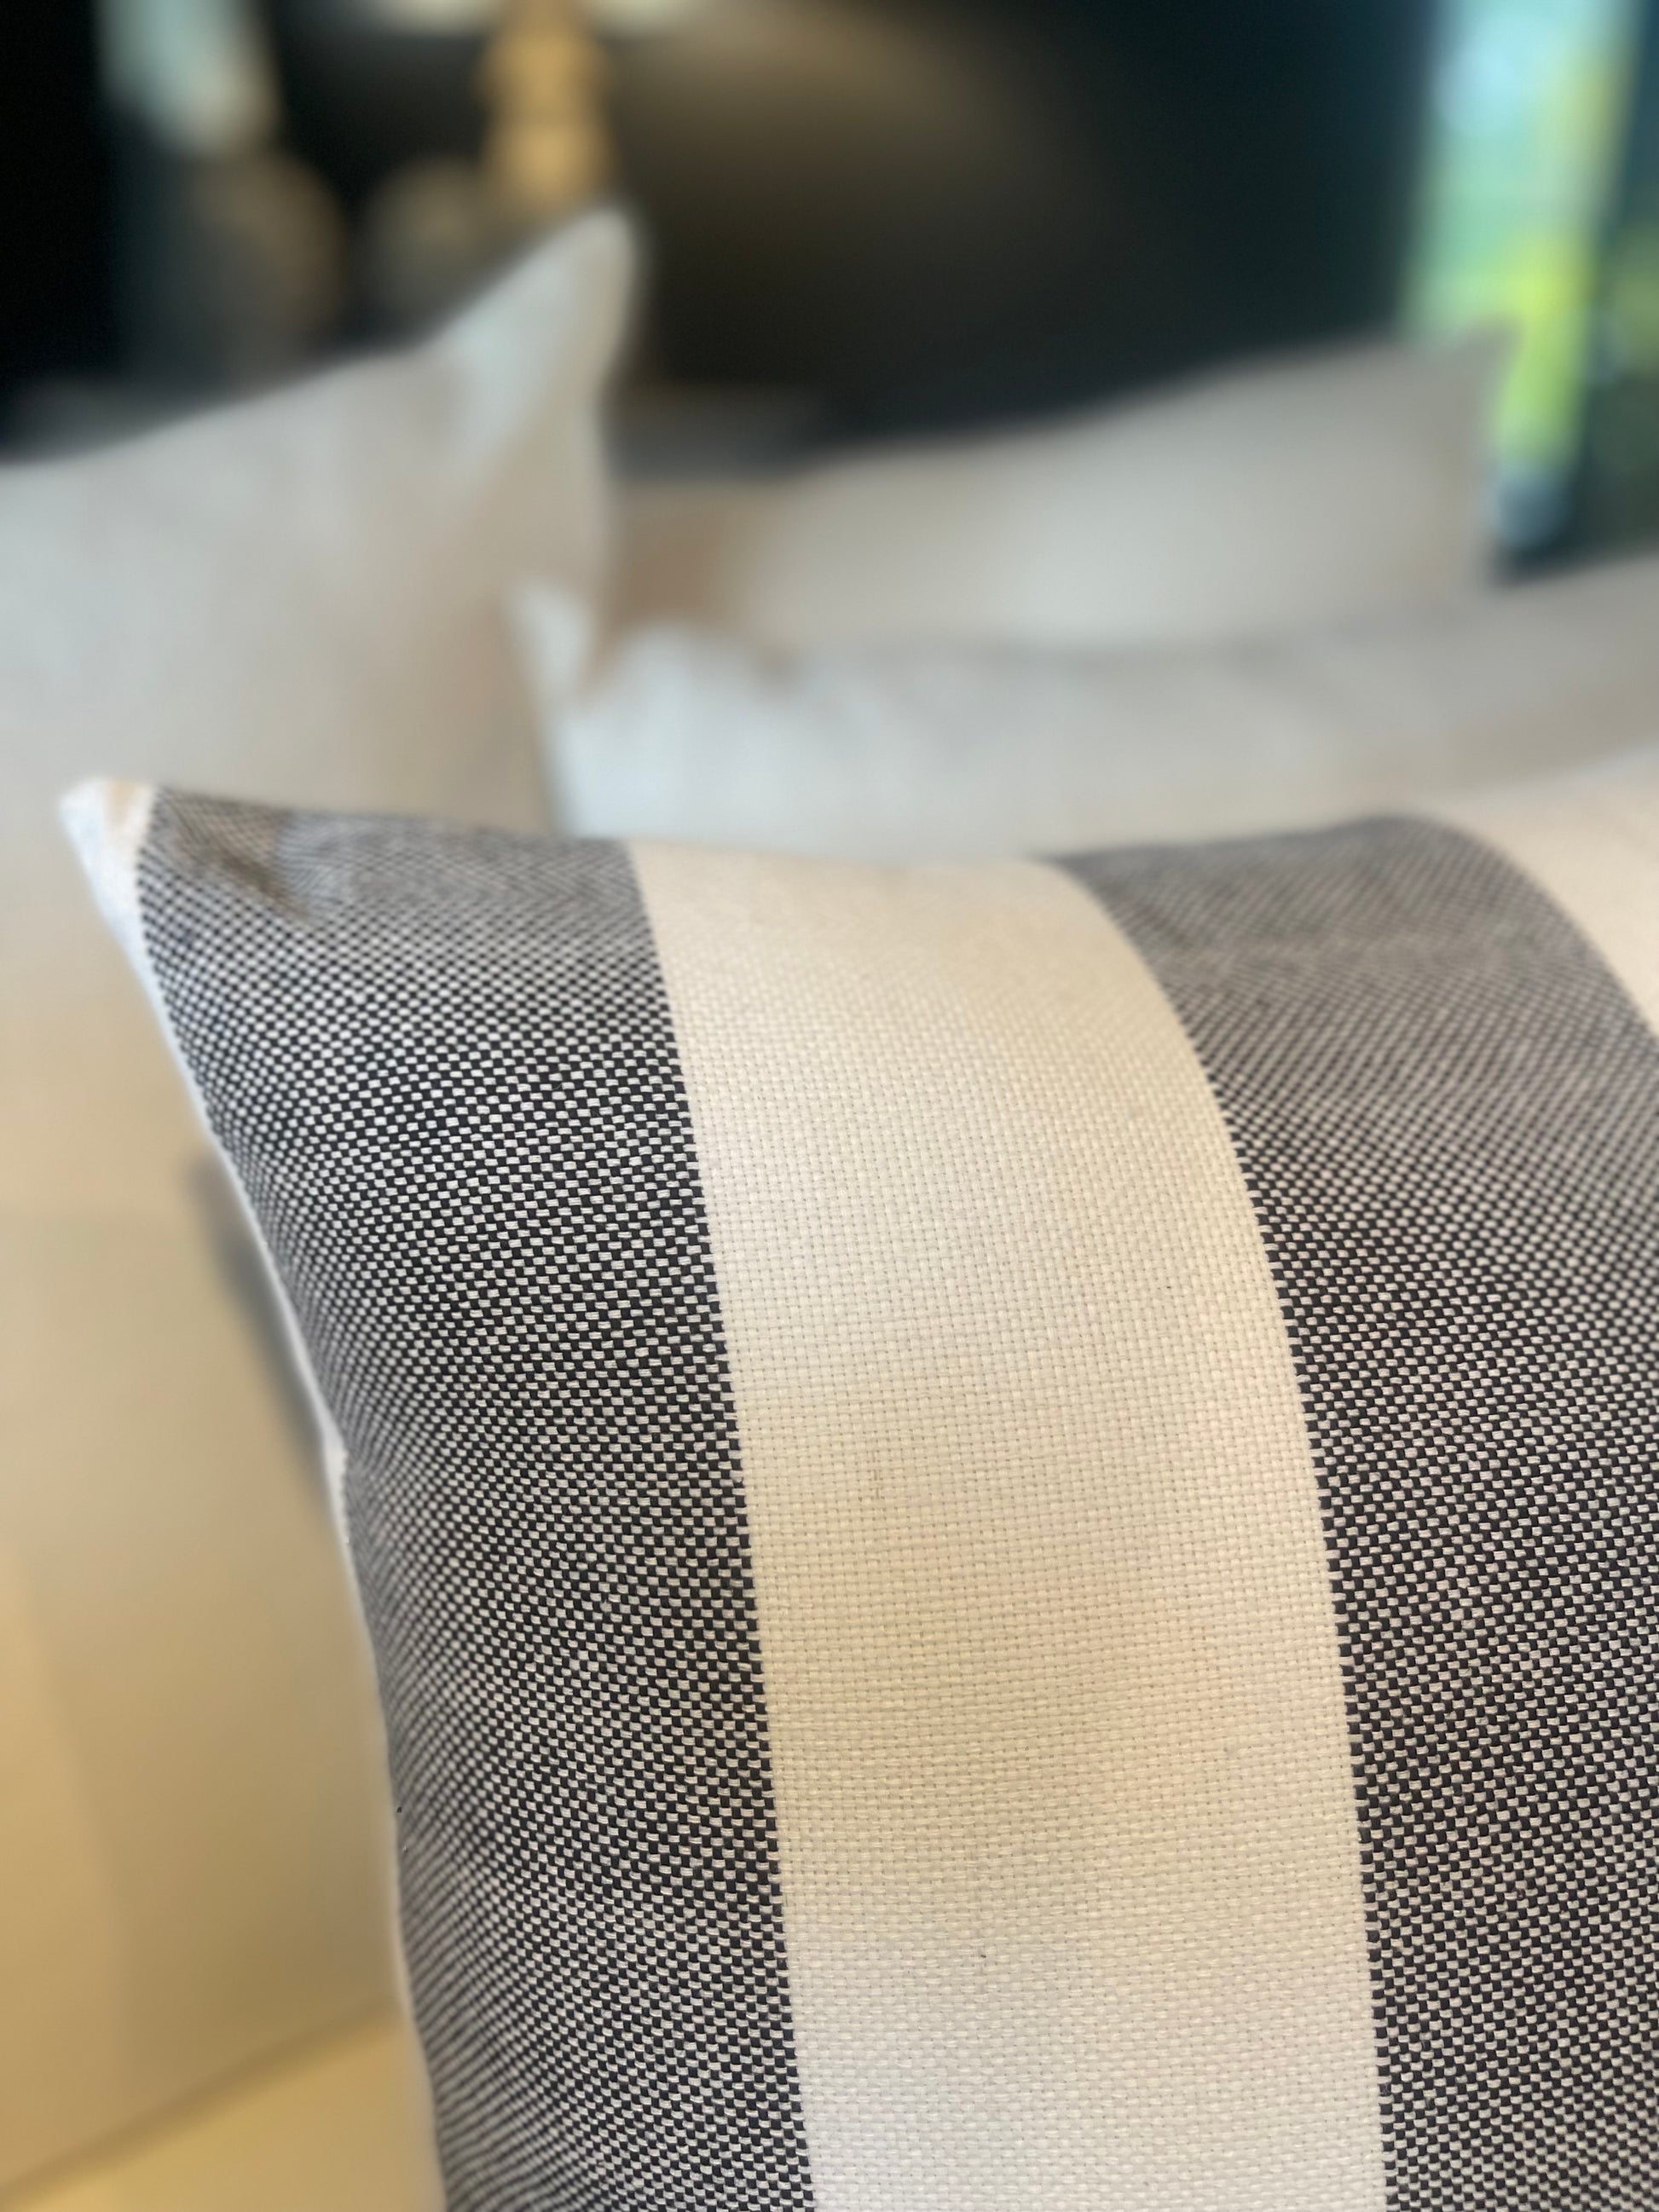 Our Lyon Handwoven Cotton Cushion boasts sleek stripes and provides versatile styling, ideal for complementing sofas and beds. Its luxurious Dacron insert adds additional comfort. Black and white coloured. Close up corner.